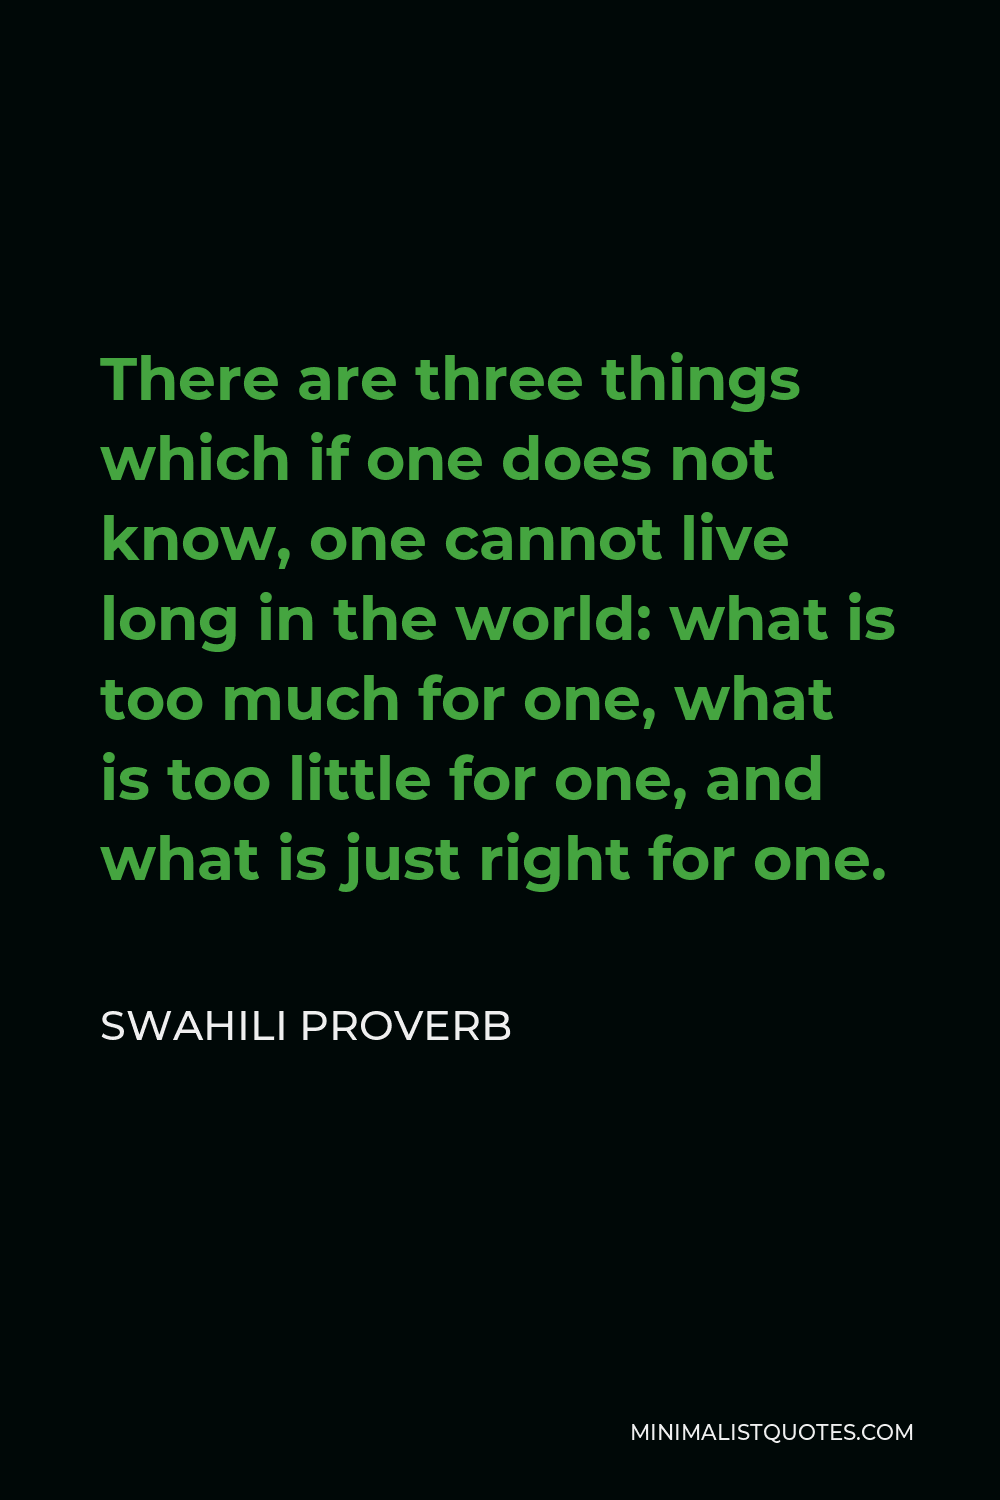 Swahili Proverb Quote - There are three things which if one does not know, one cannot live long in the world: what is too much for one, what is too little for one, and what is just right for one.